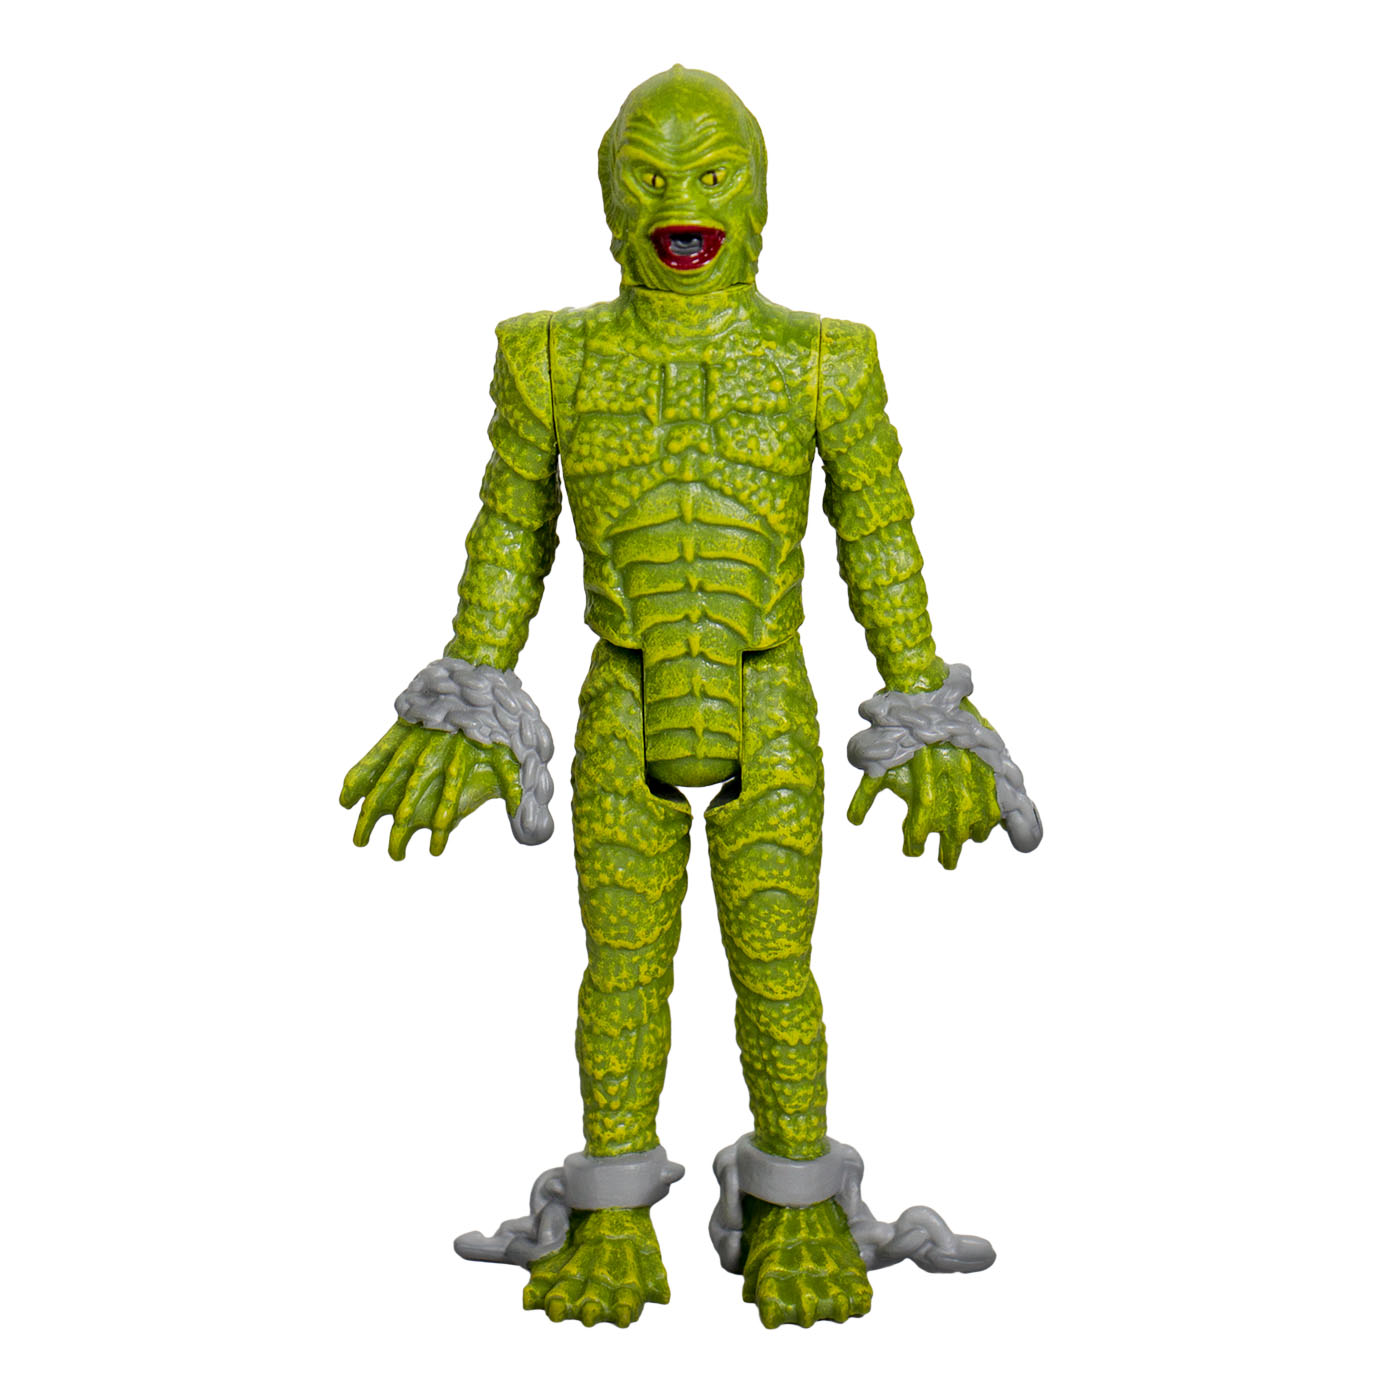 Terror is loose at Super7! Revenge of the Creature figure has escaped!